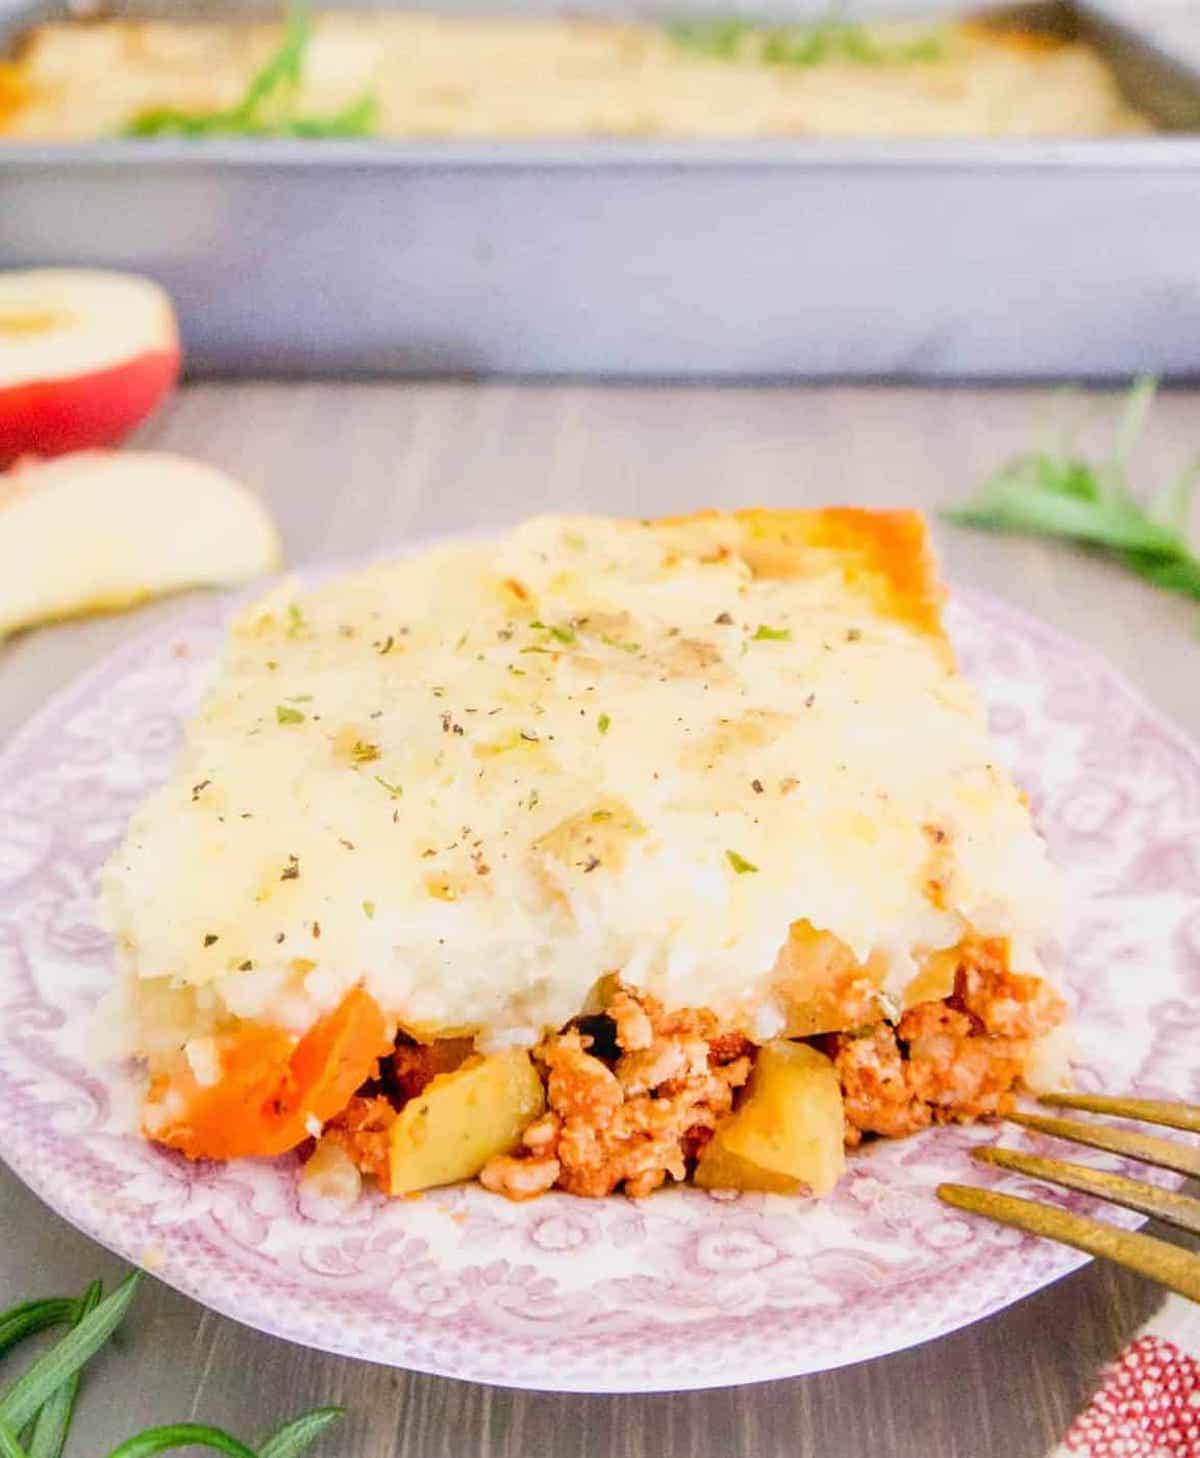 A slice of healthy shepherd's pie with ground turkey and apples on a plate.